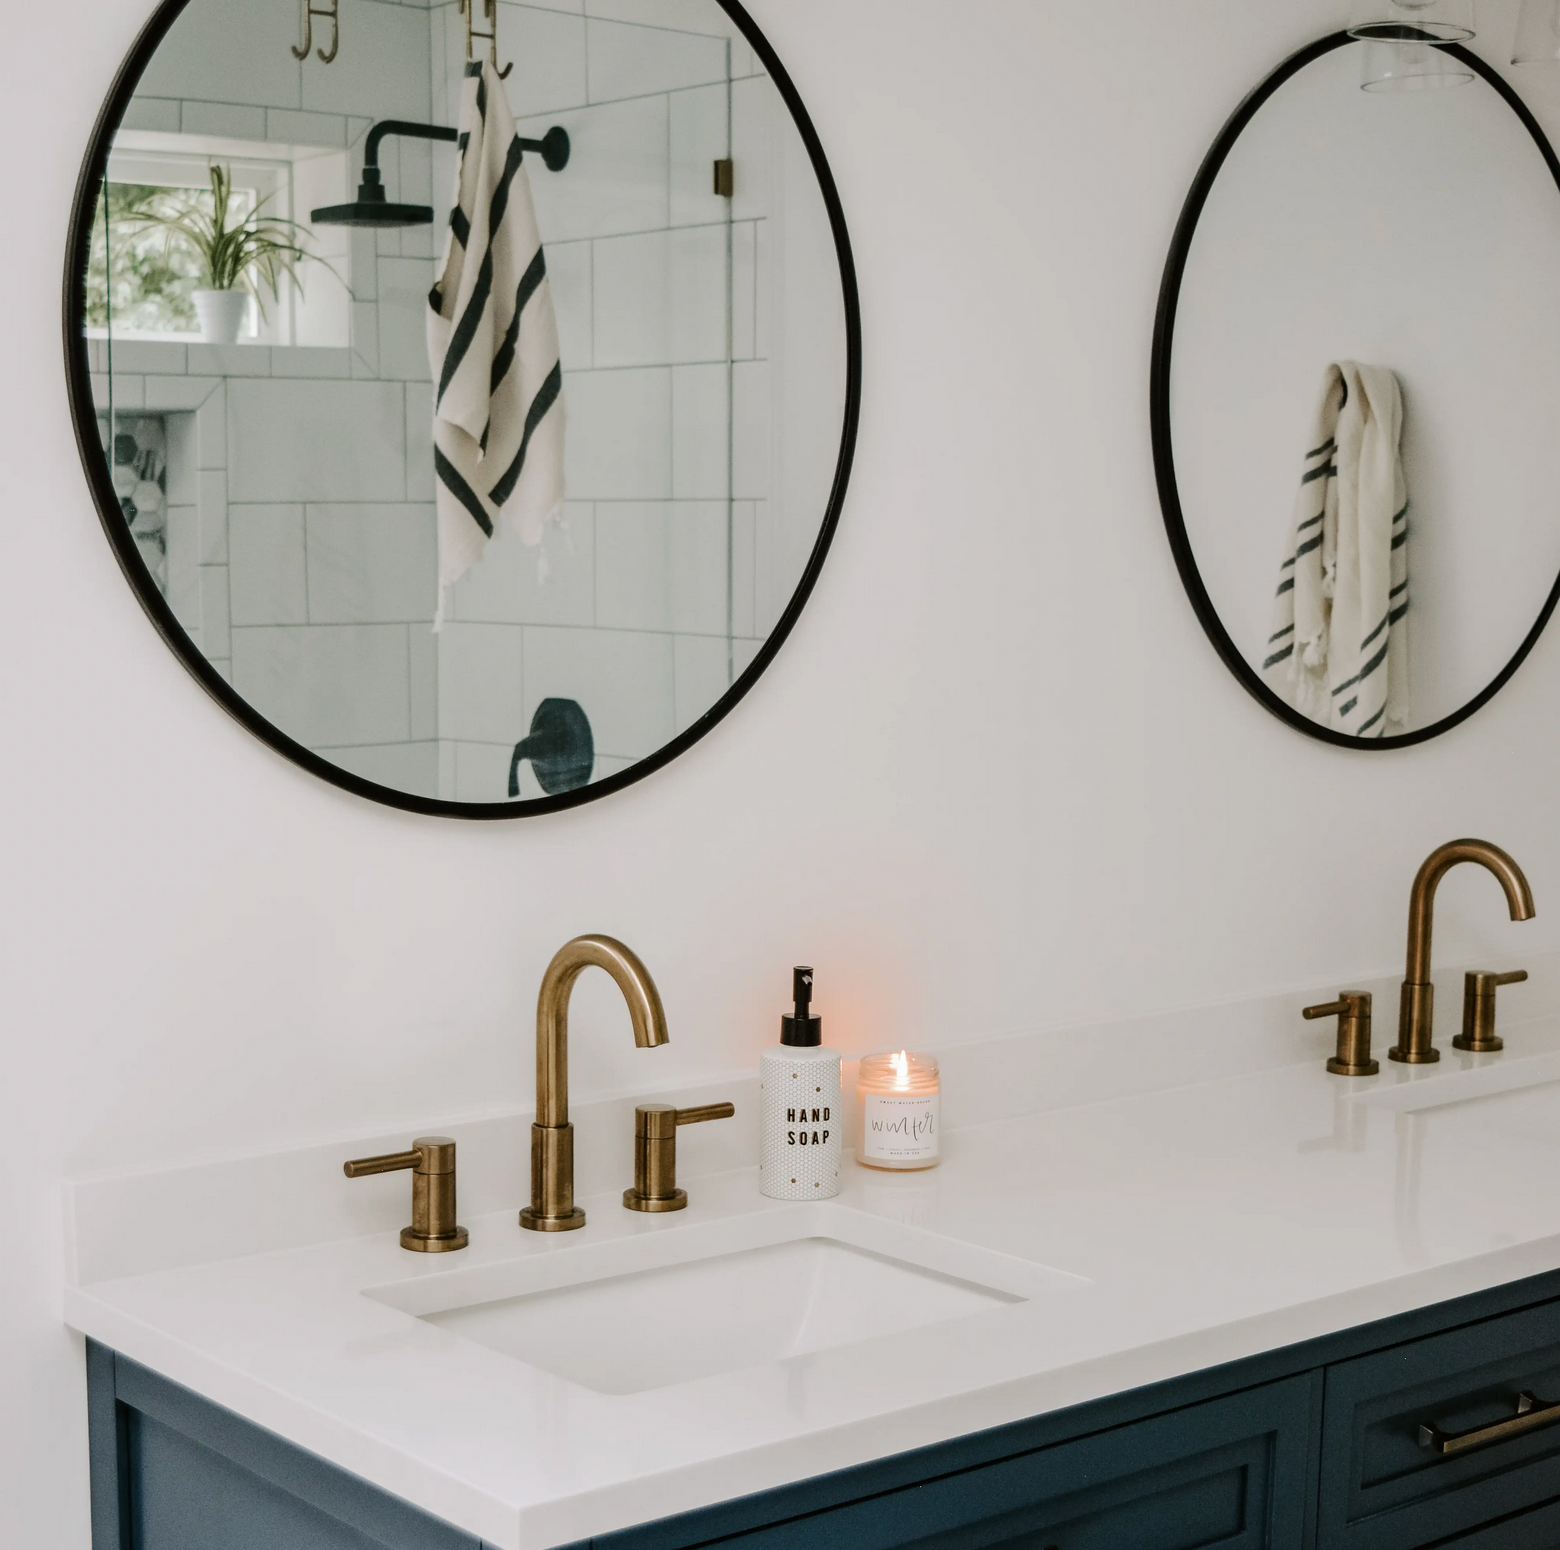 Update Your Bathroom with Accessories: Soap Dispensers, Mats, and More!